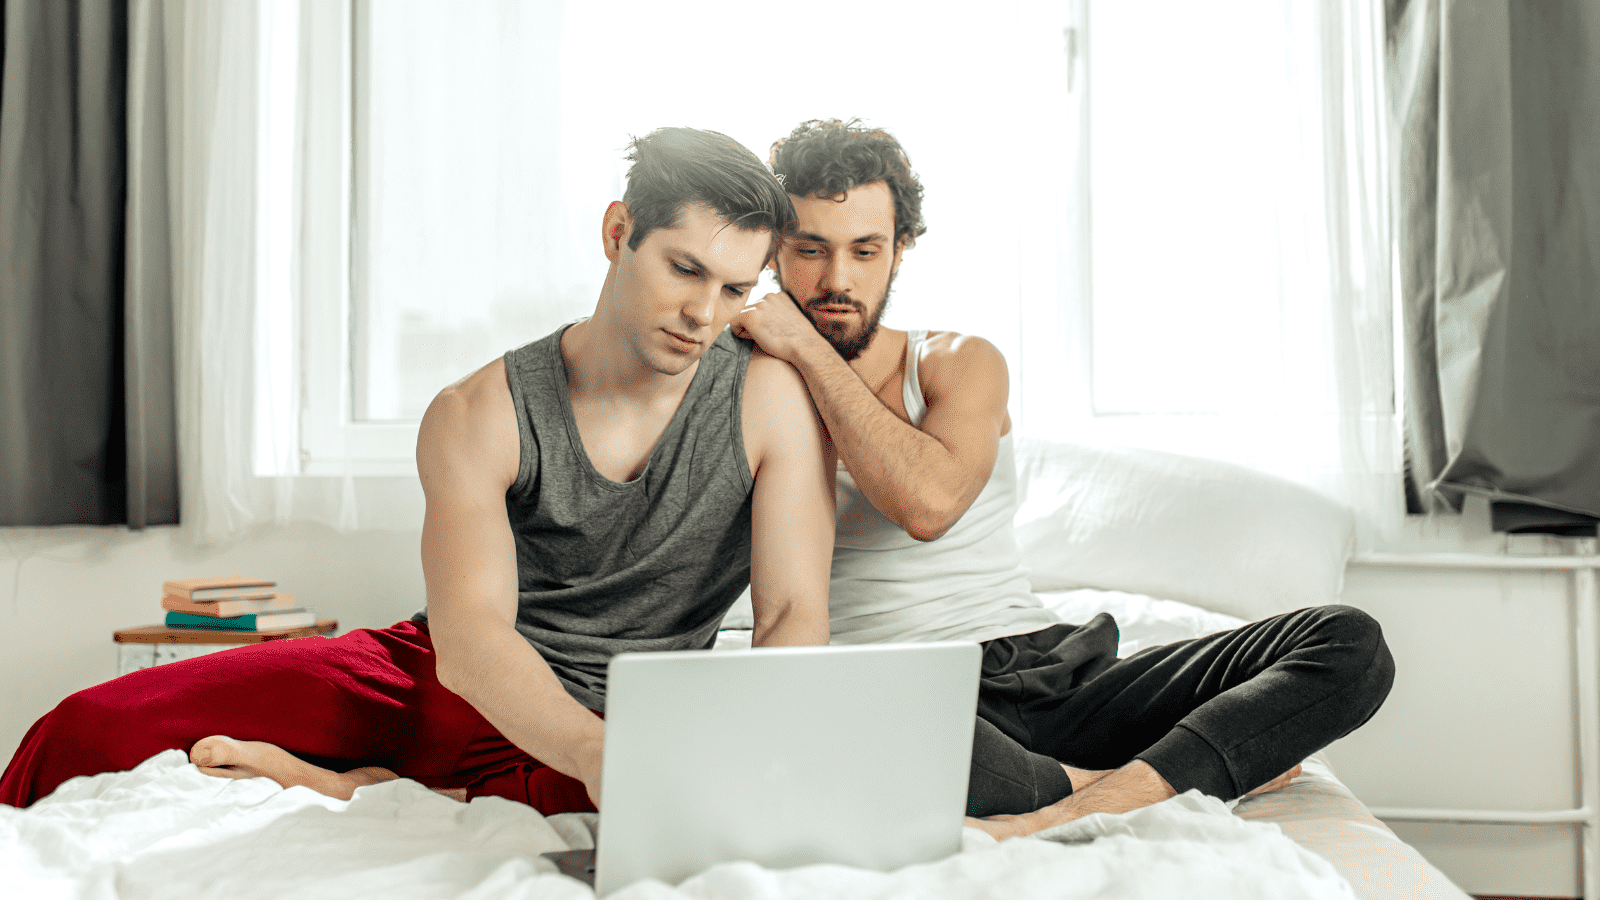 Chaturbate gay couple webcam modeling